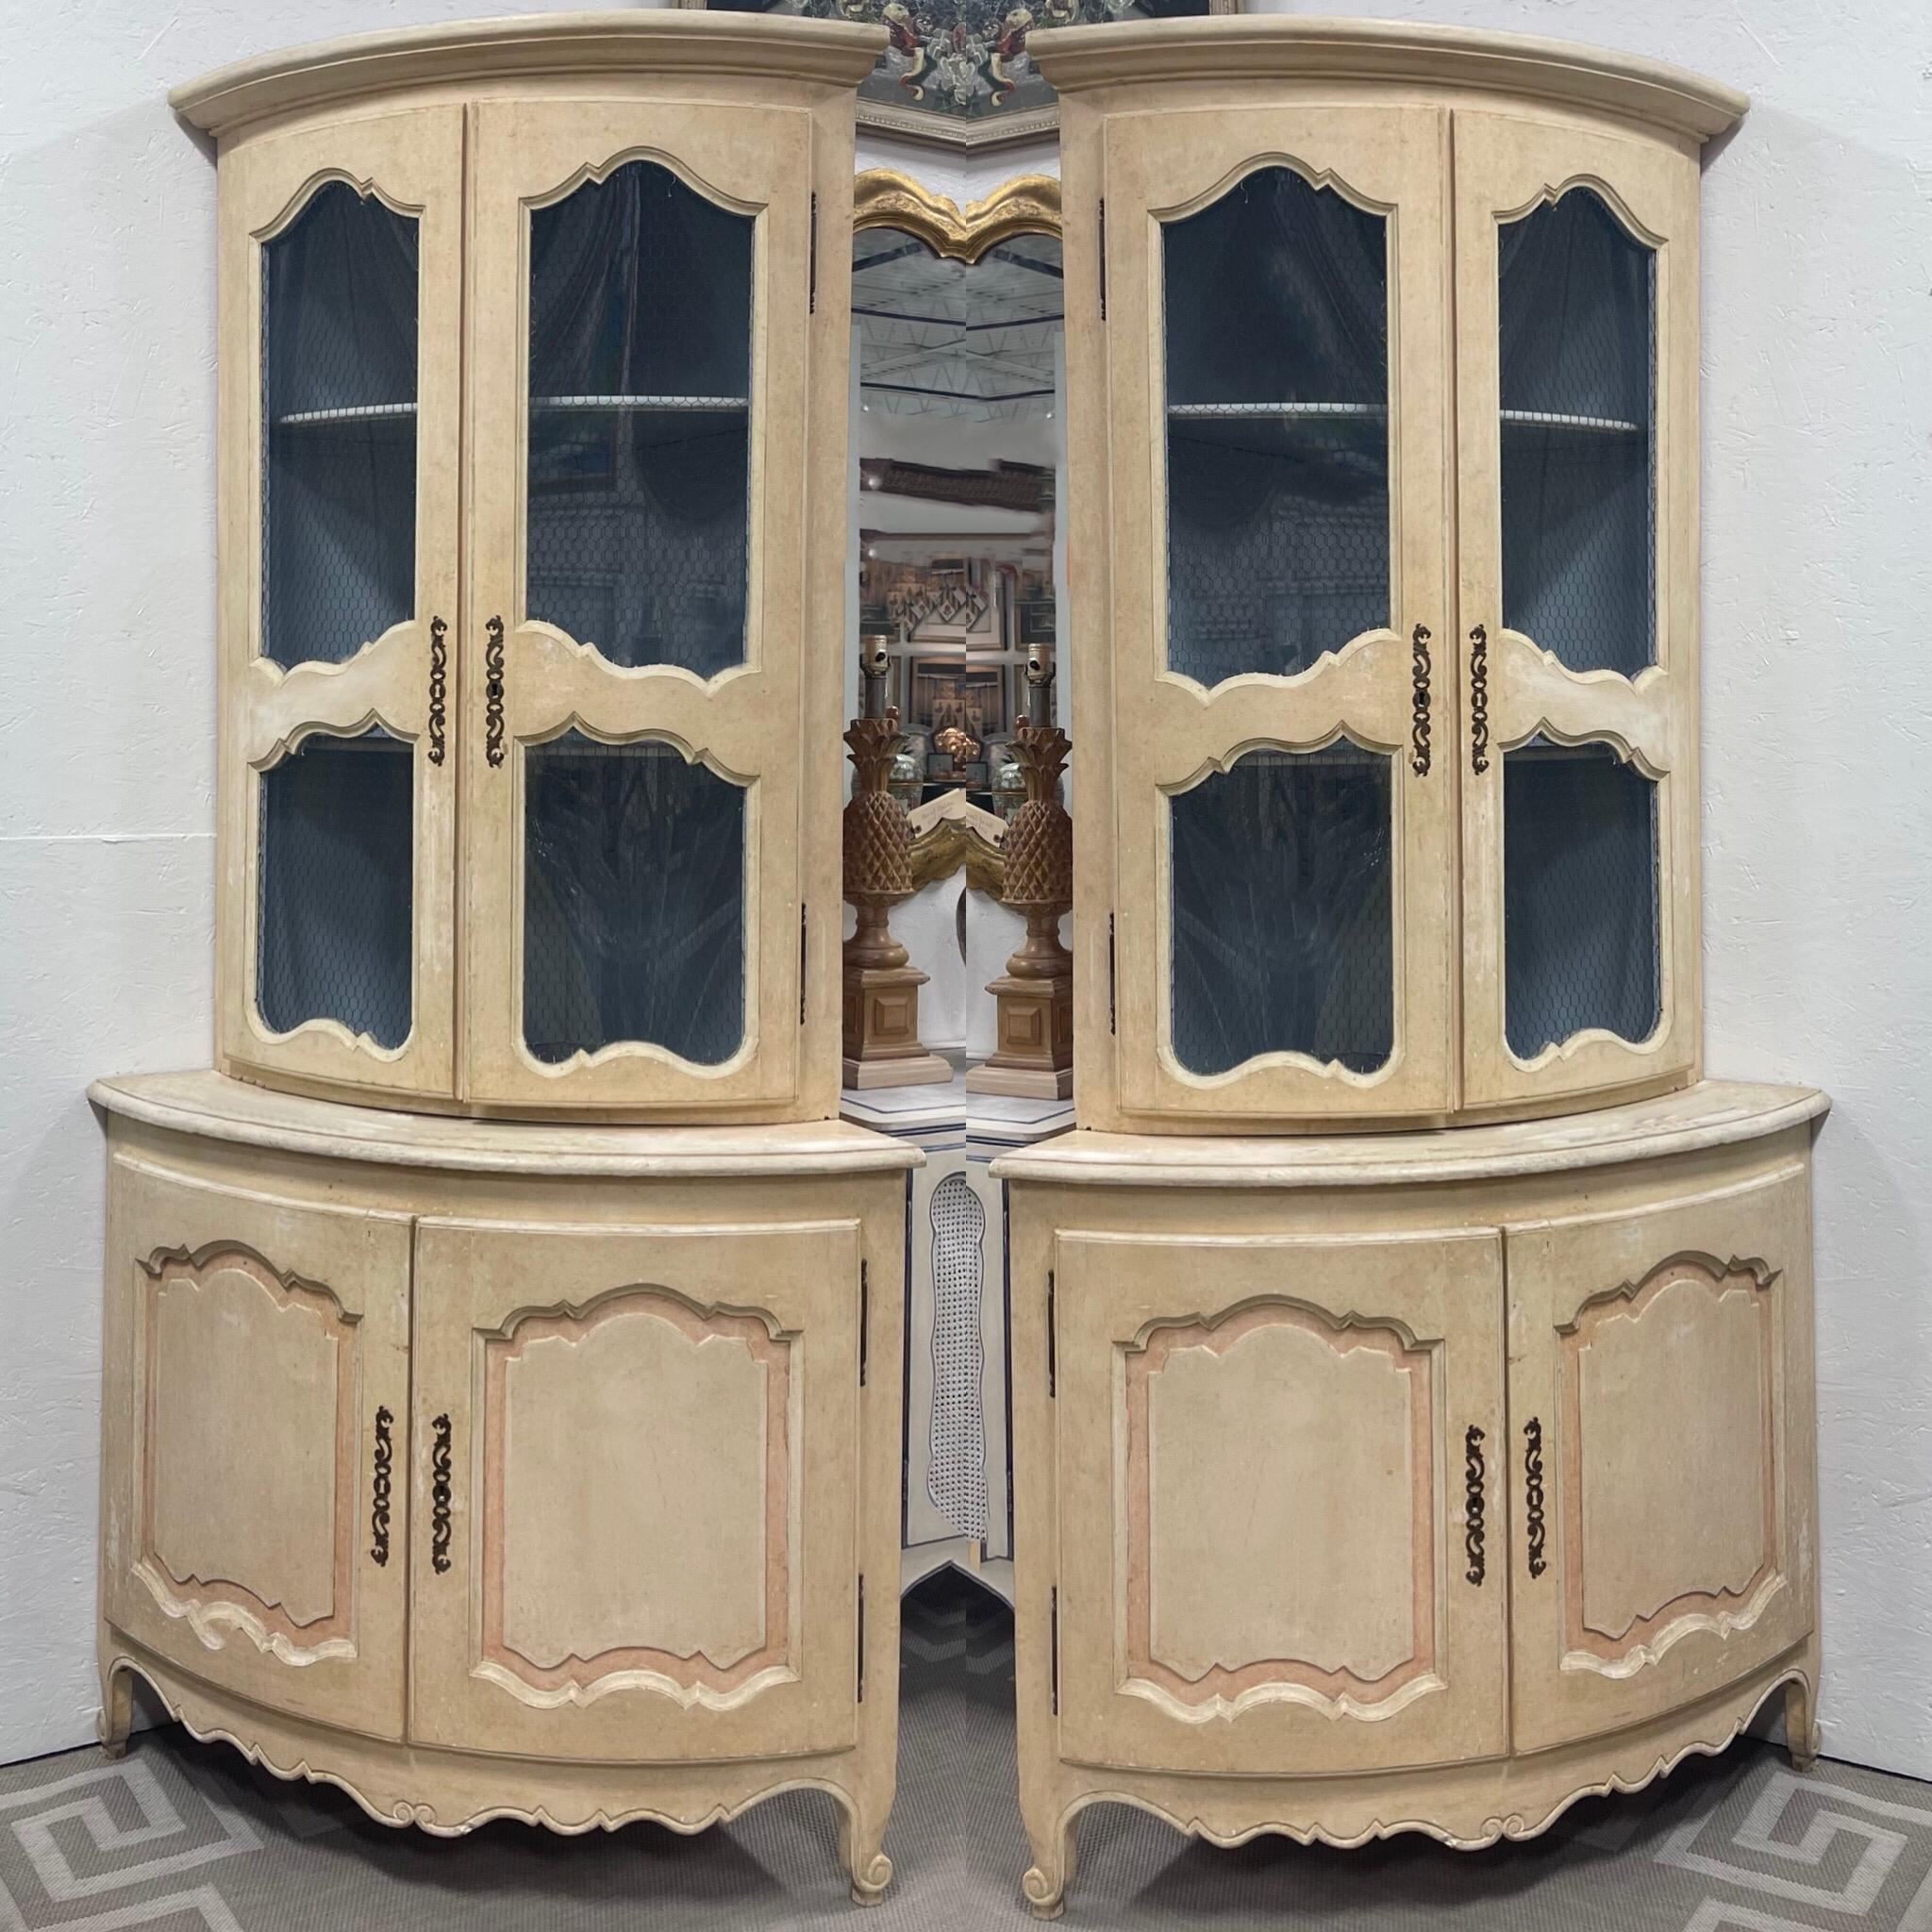 These are wonderful! This is a pair of hand painted Italian corner cabinets with French styling. The interior pops in a vibrant robin’s egg blue, and the exterior is ivory with a hint of salmon. The top has wire doors under a protective shield that